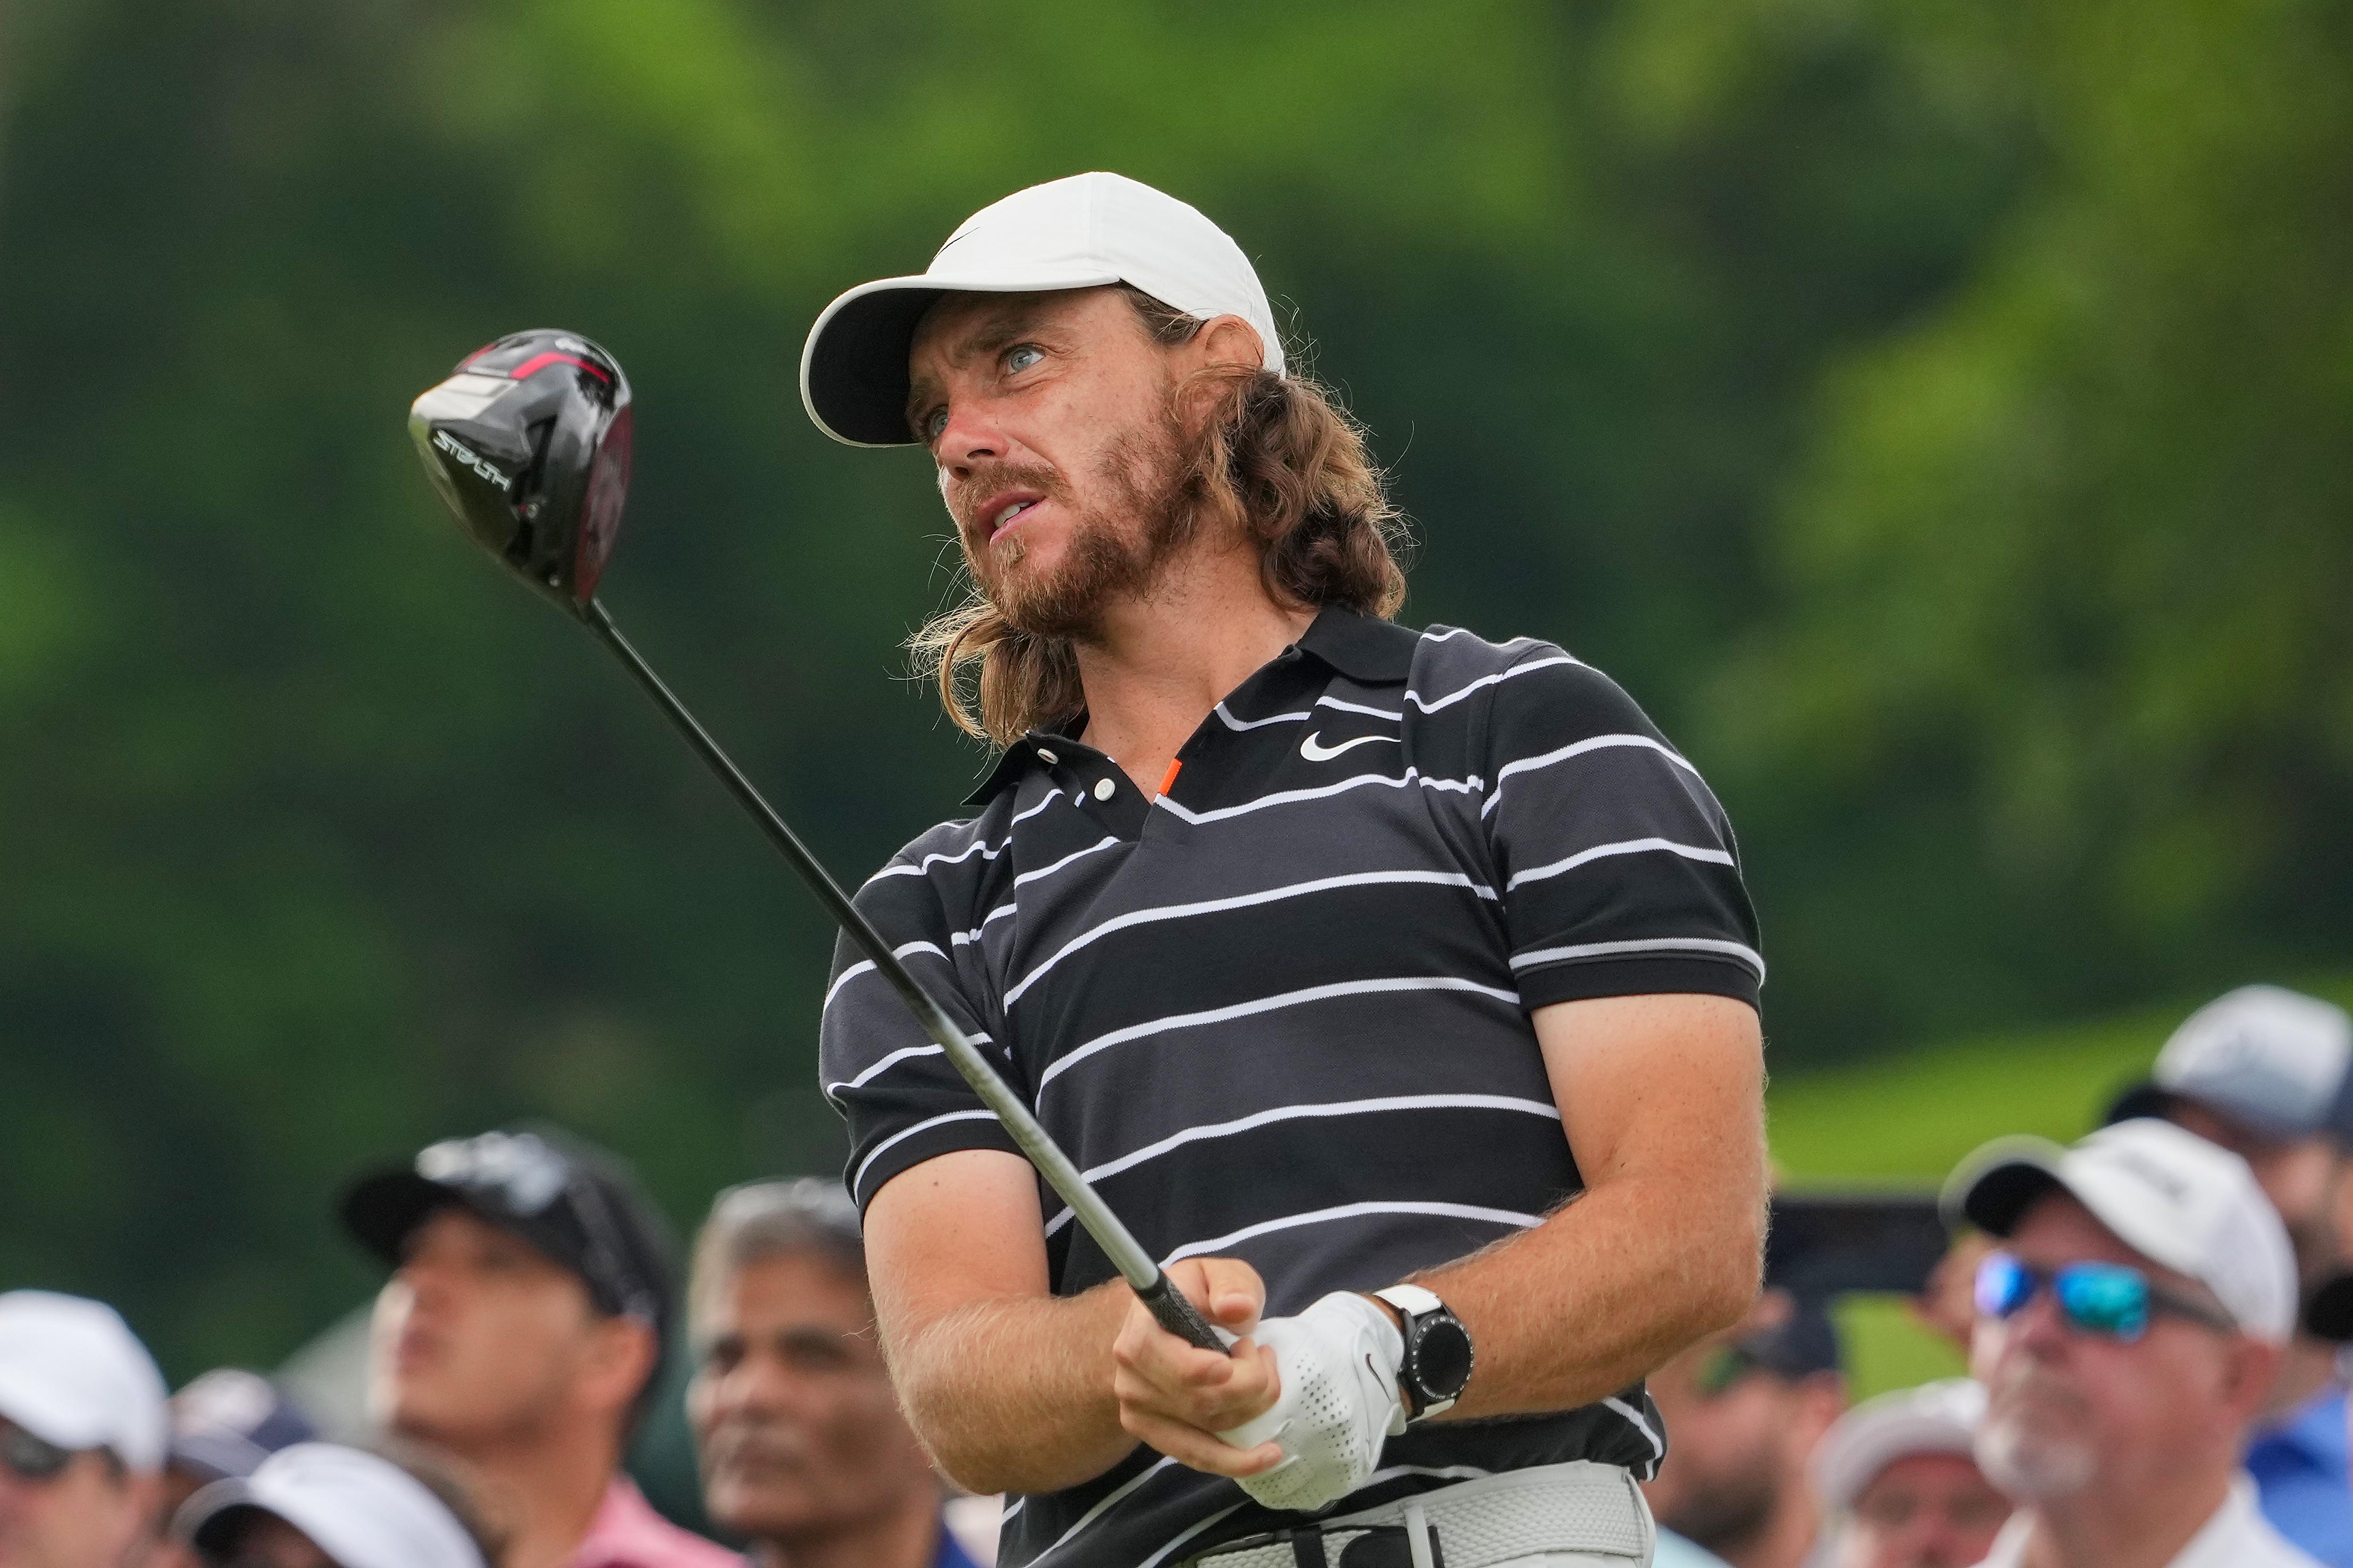 Tommy Fleetwood Open Championship 2022 Odds, History, Predictions & How to Watch